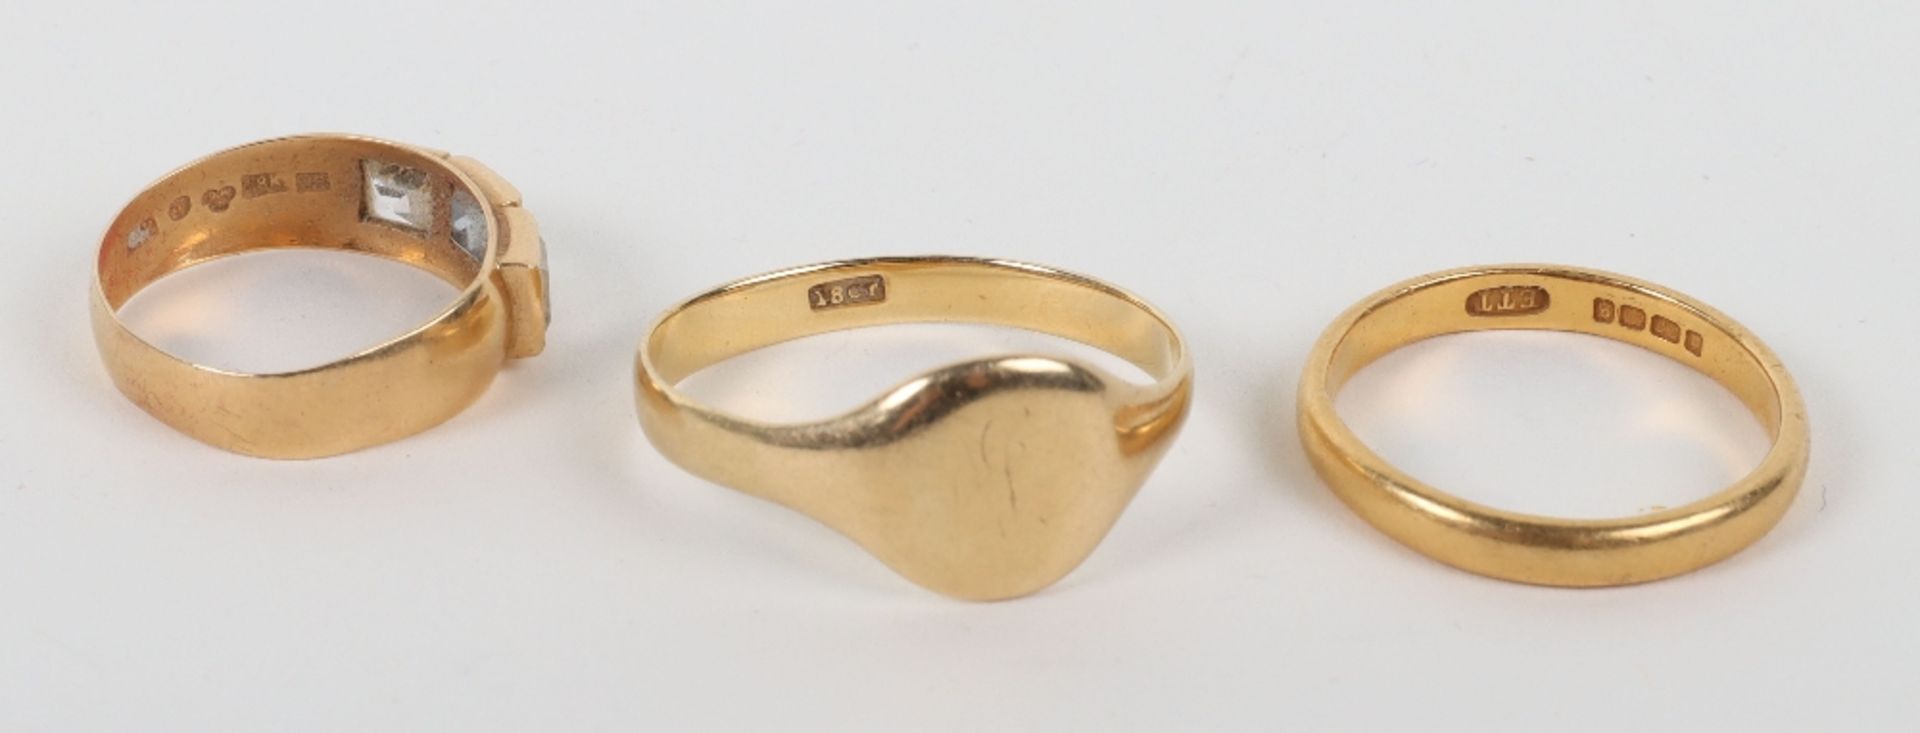 Two men’s gold rings - Image 3 of 3